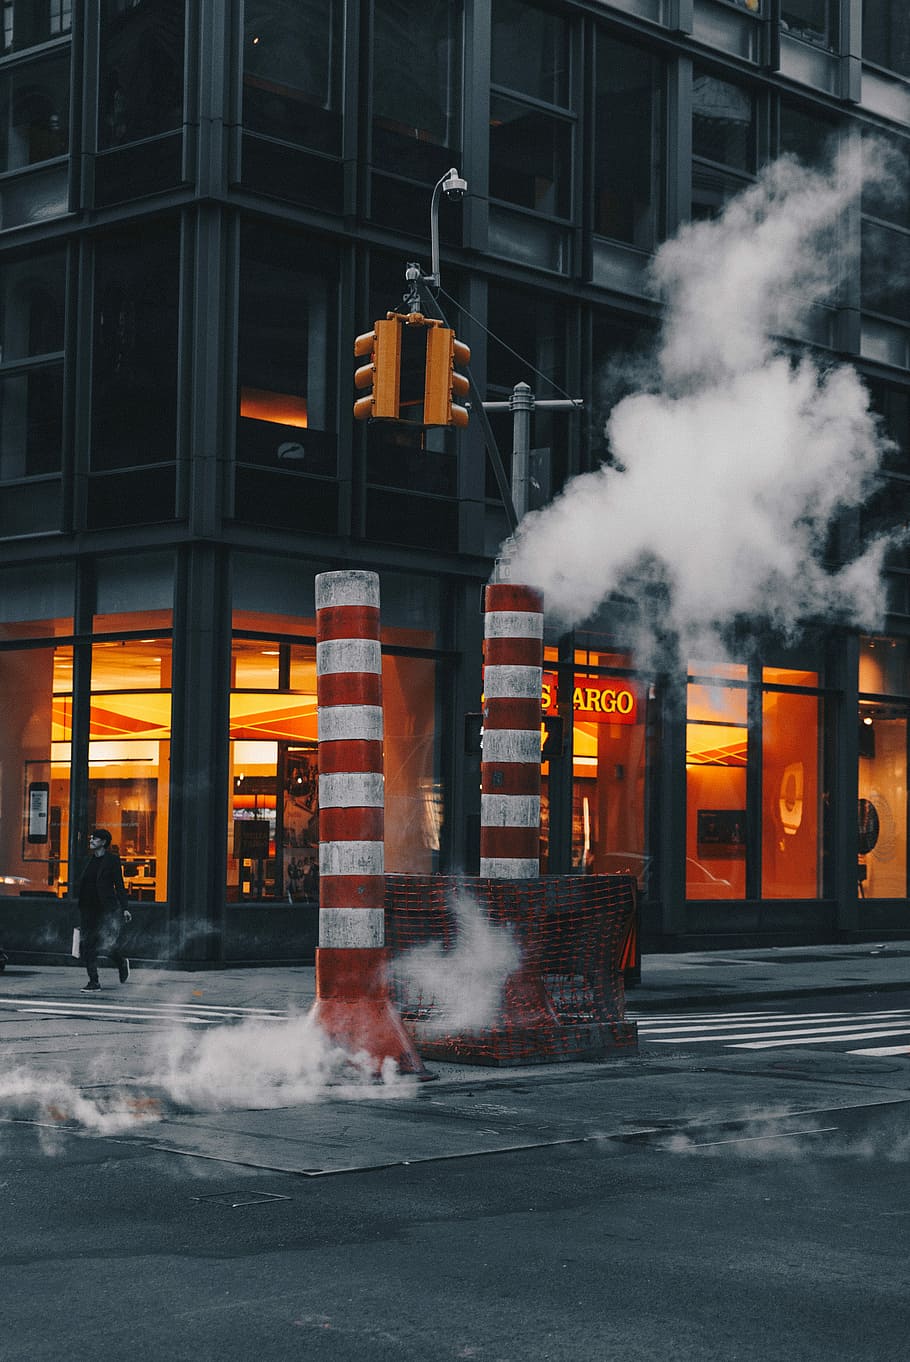 HD wallpaper: red-and-white striped post near concrete building during  daytime, pipe with smoke at street near building | Wallpaper Flare